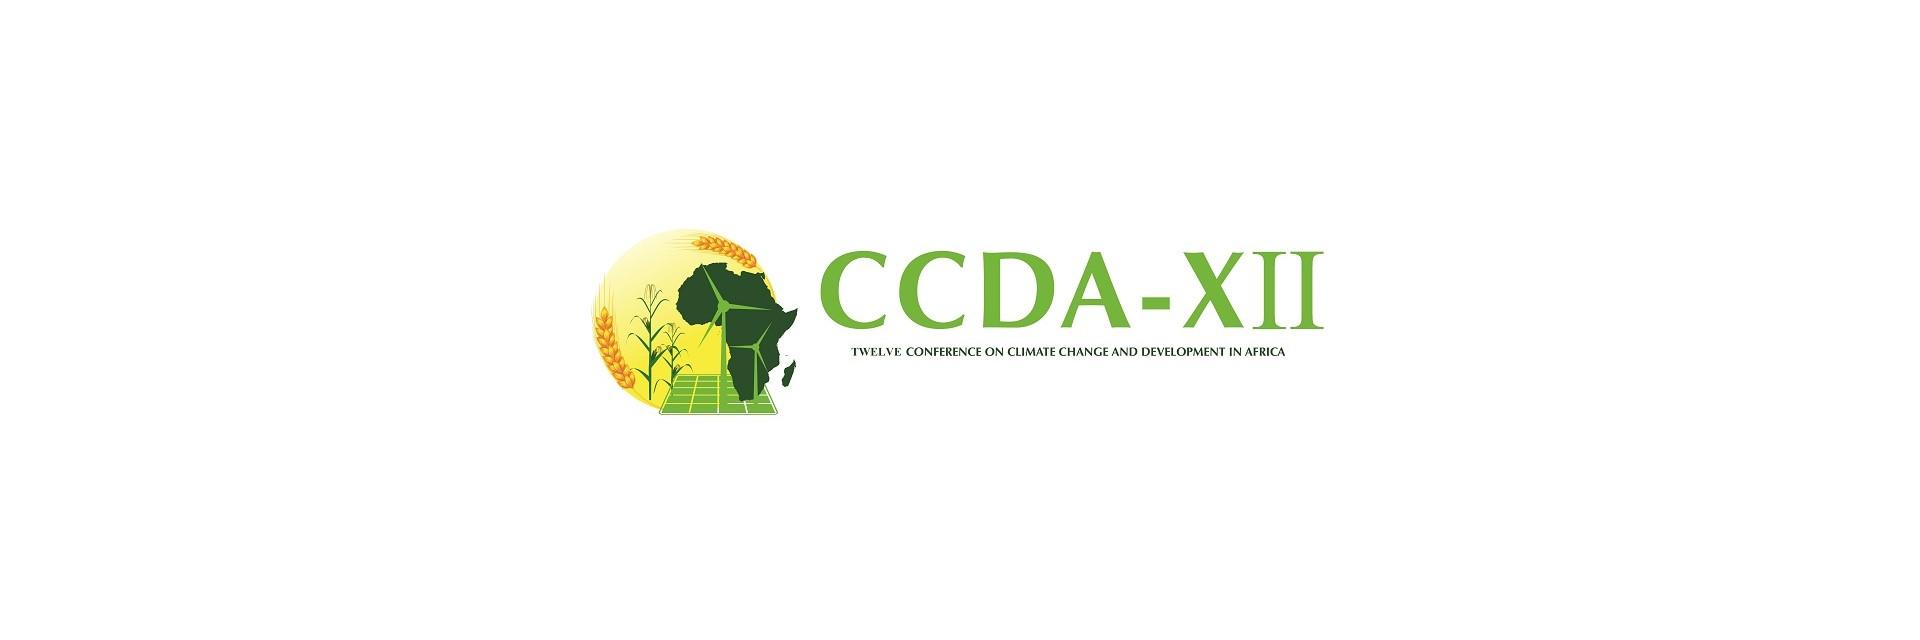 Twelfth Conference on Climate Change and Development in Africa